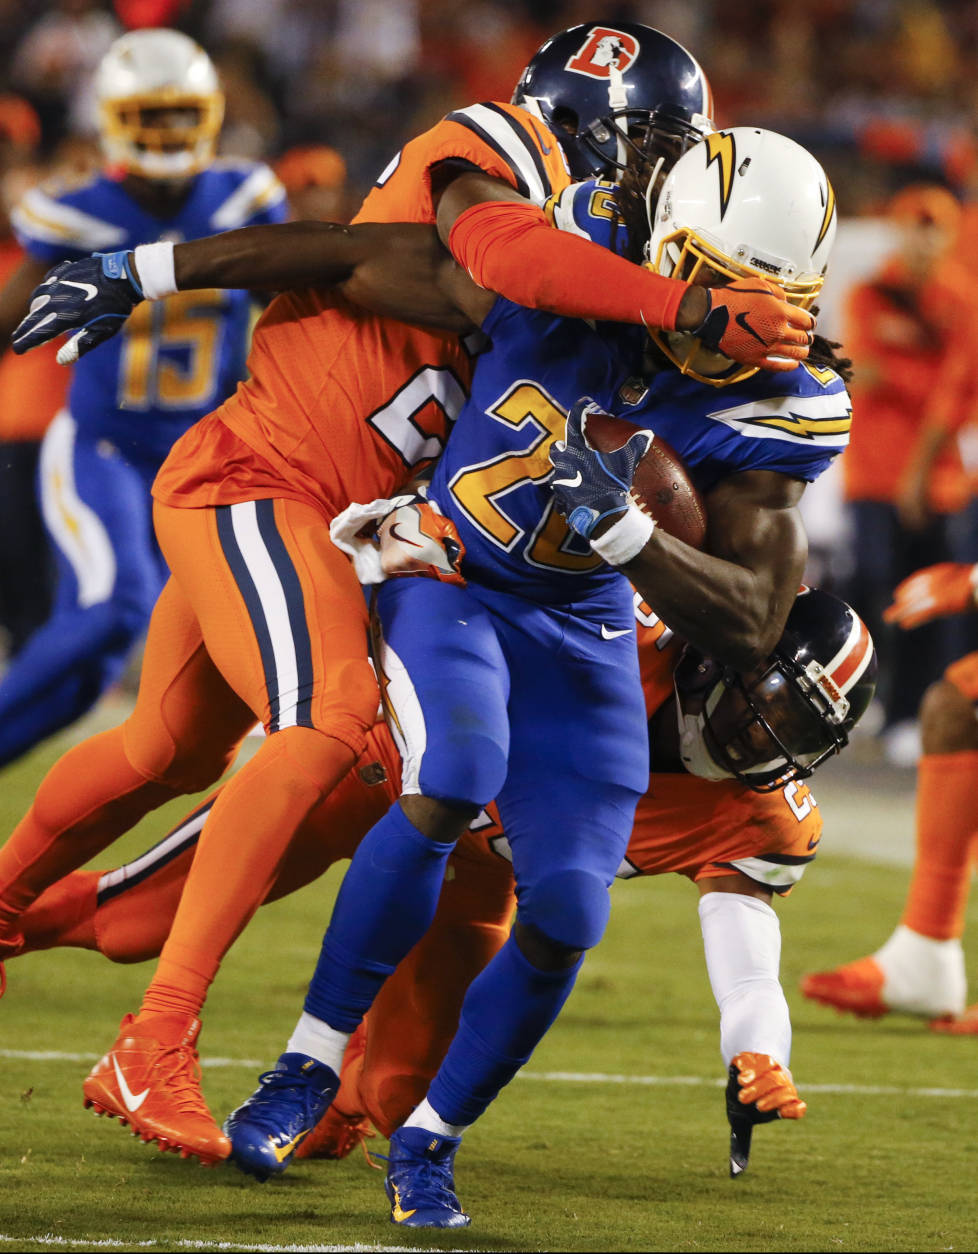 San Diego Chargers running back Melvin Gordon is brought down by Denver Broncos free safety Darian Stewart, above, and cornerback Chris Harris, below, during the second half of an NFL football game Thursday, Oct. 13, 2016, in San Diego. (AP Photo/Lenny Ignelzi)